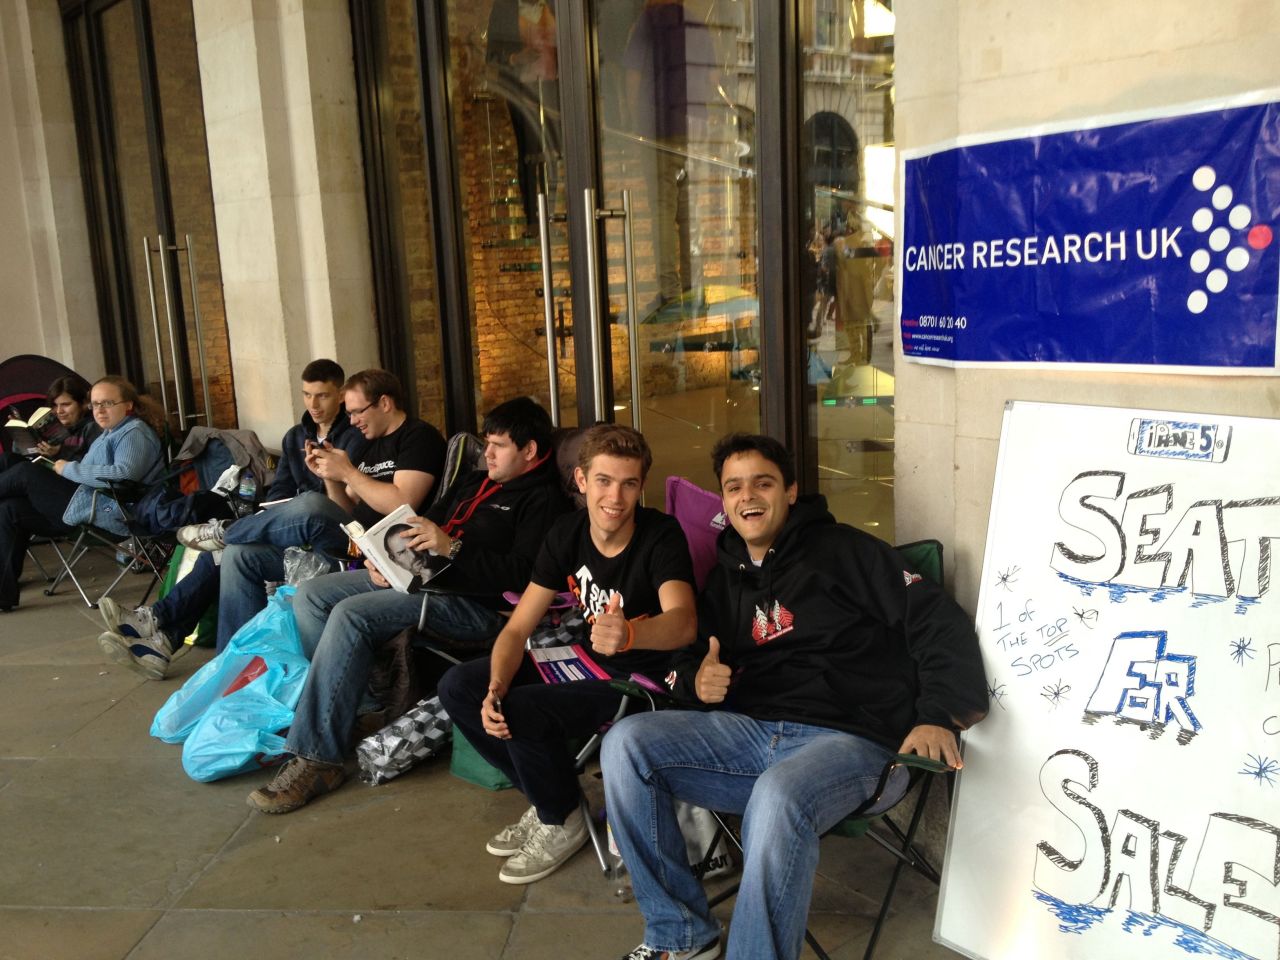 Alexandre Marchetti walked by the Apple store in London's Covent Garden on Thursday and <a href="http://ireport.cnn.com/docs/DOC-844355">shot this photo</a> of a man offering a seat for sale at the front of the iPhone 5 line to raise money for cancer research. It's going for 600 pounds, or nearly $1,000 U.S. dollars. The man has been waiting since Friday.